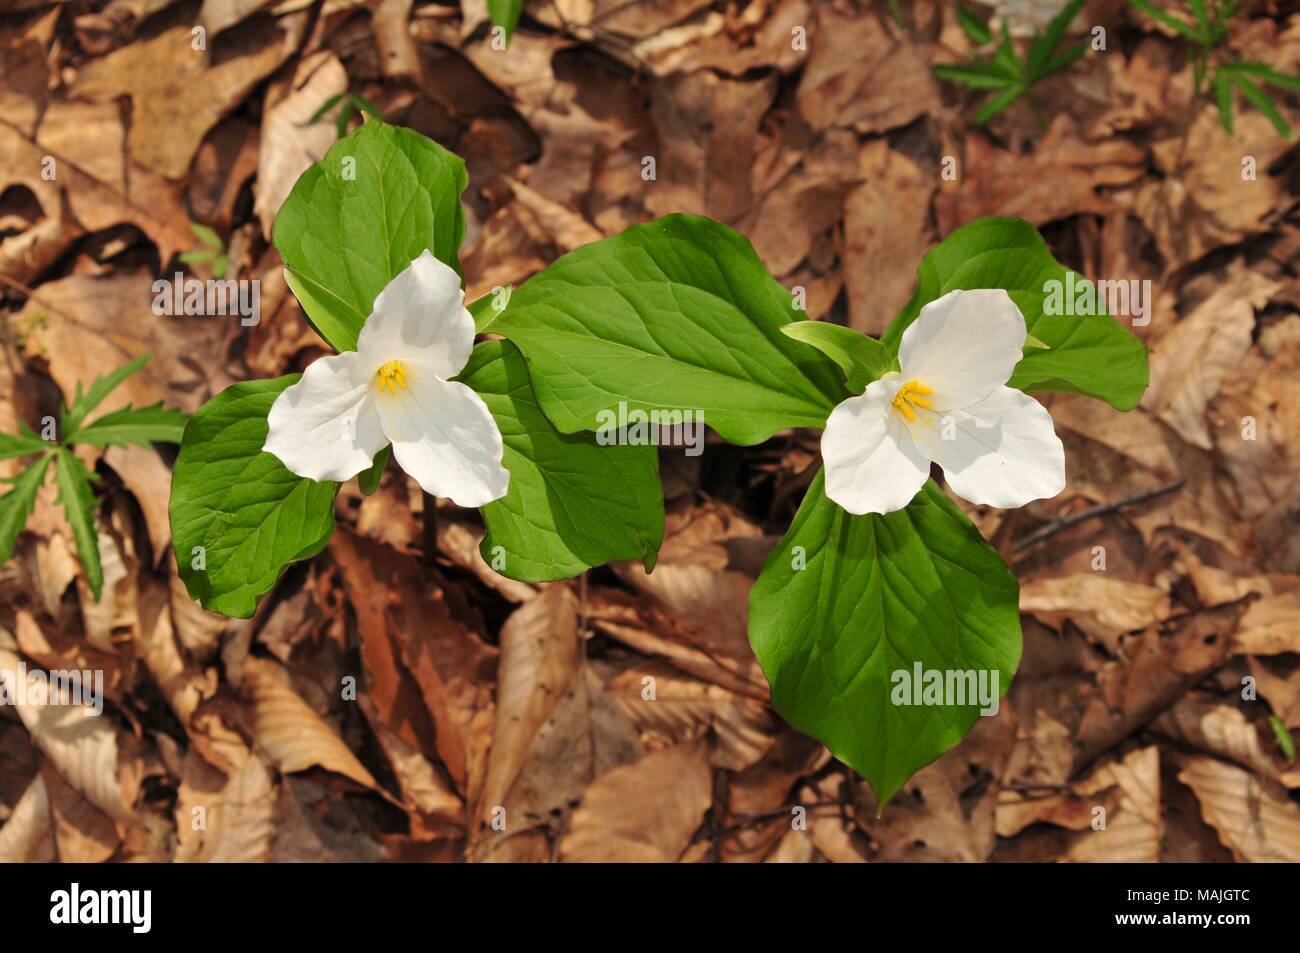 Flowers of two large white trillium plants with large green leaves in a spring forest Stock Photo